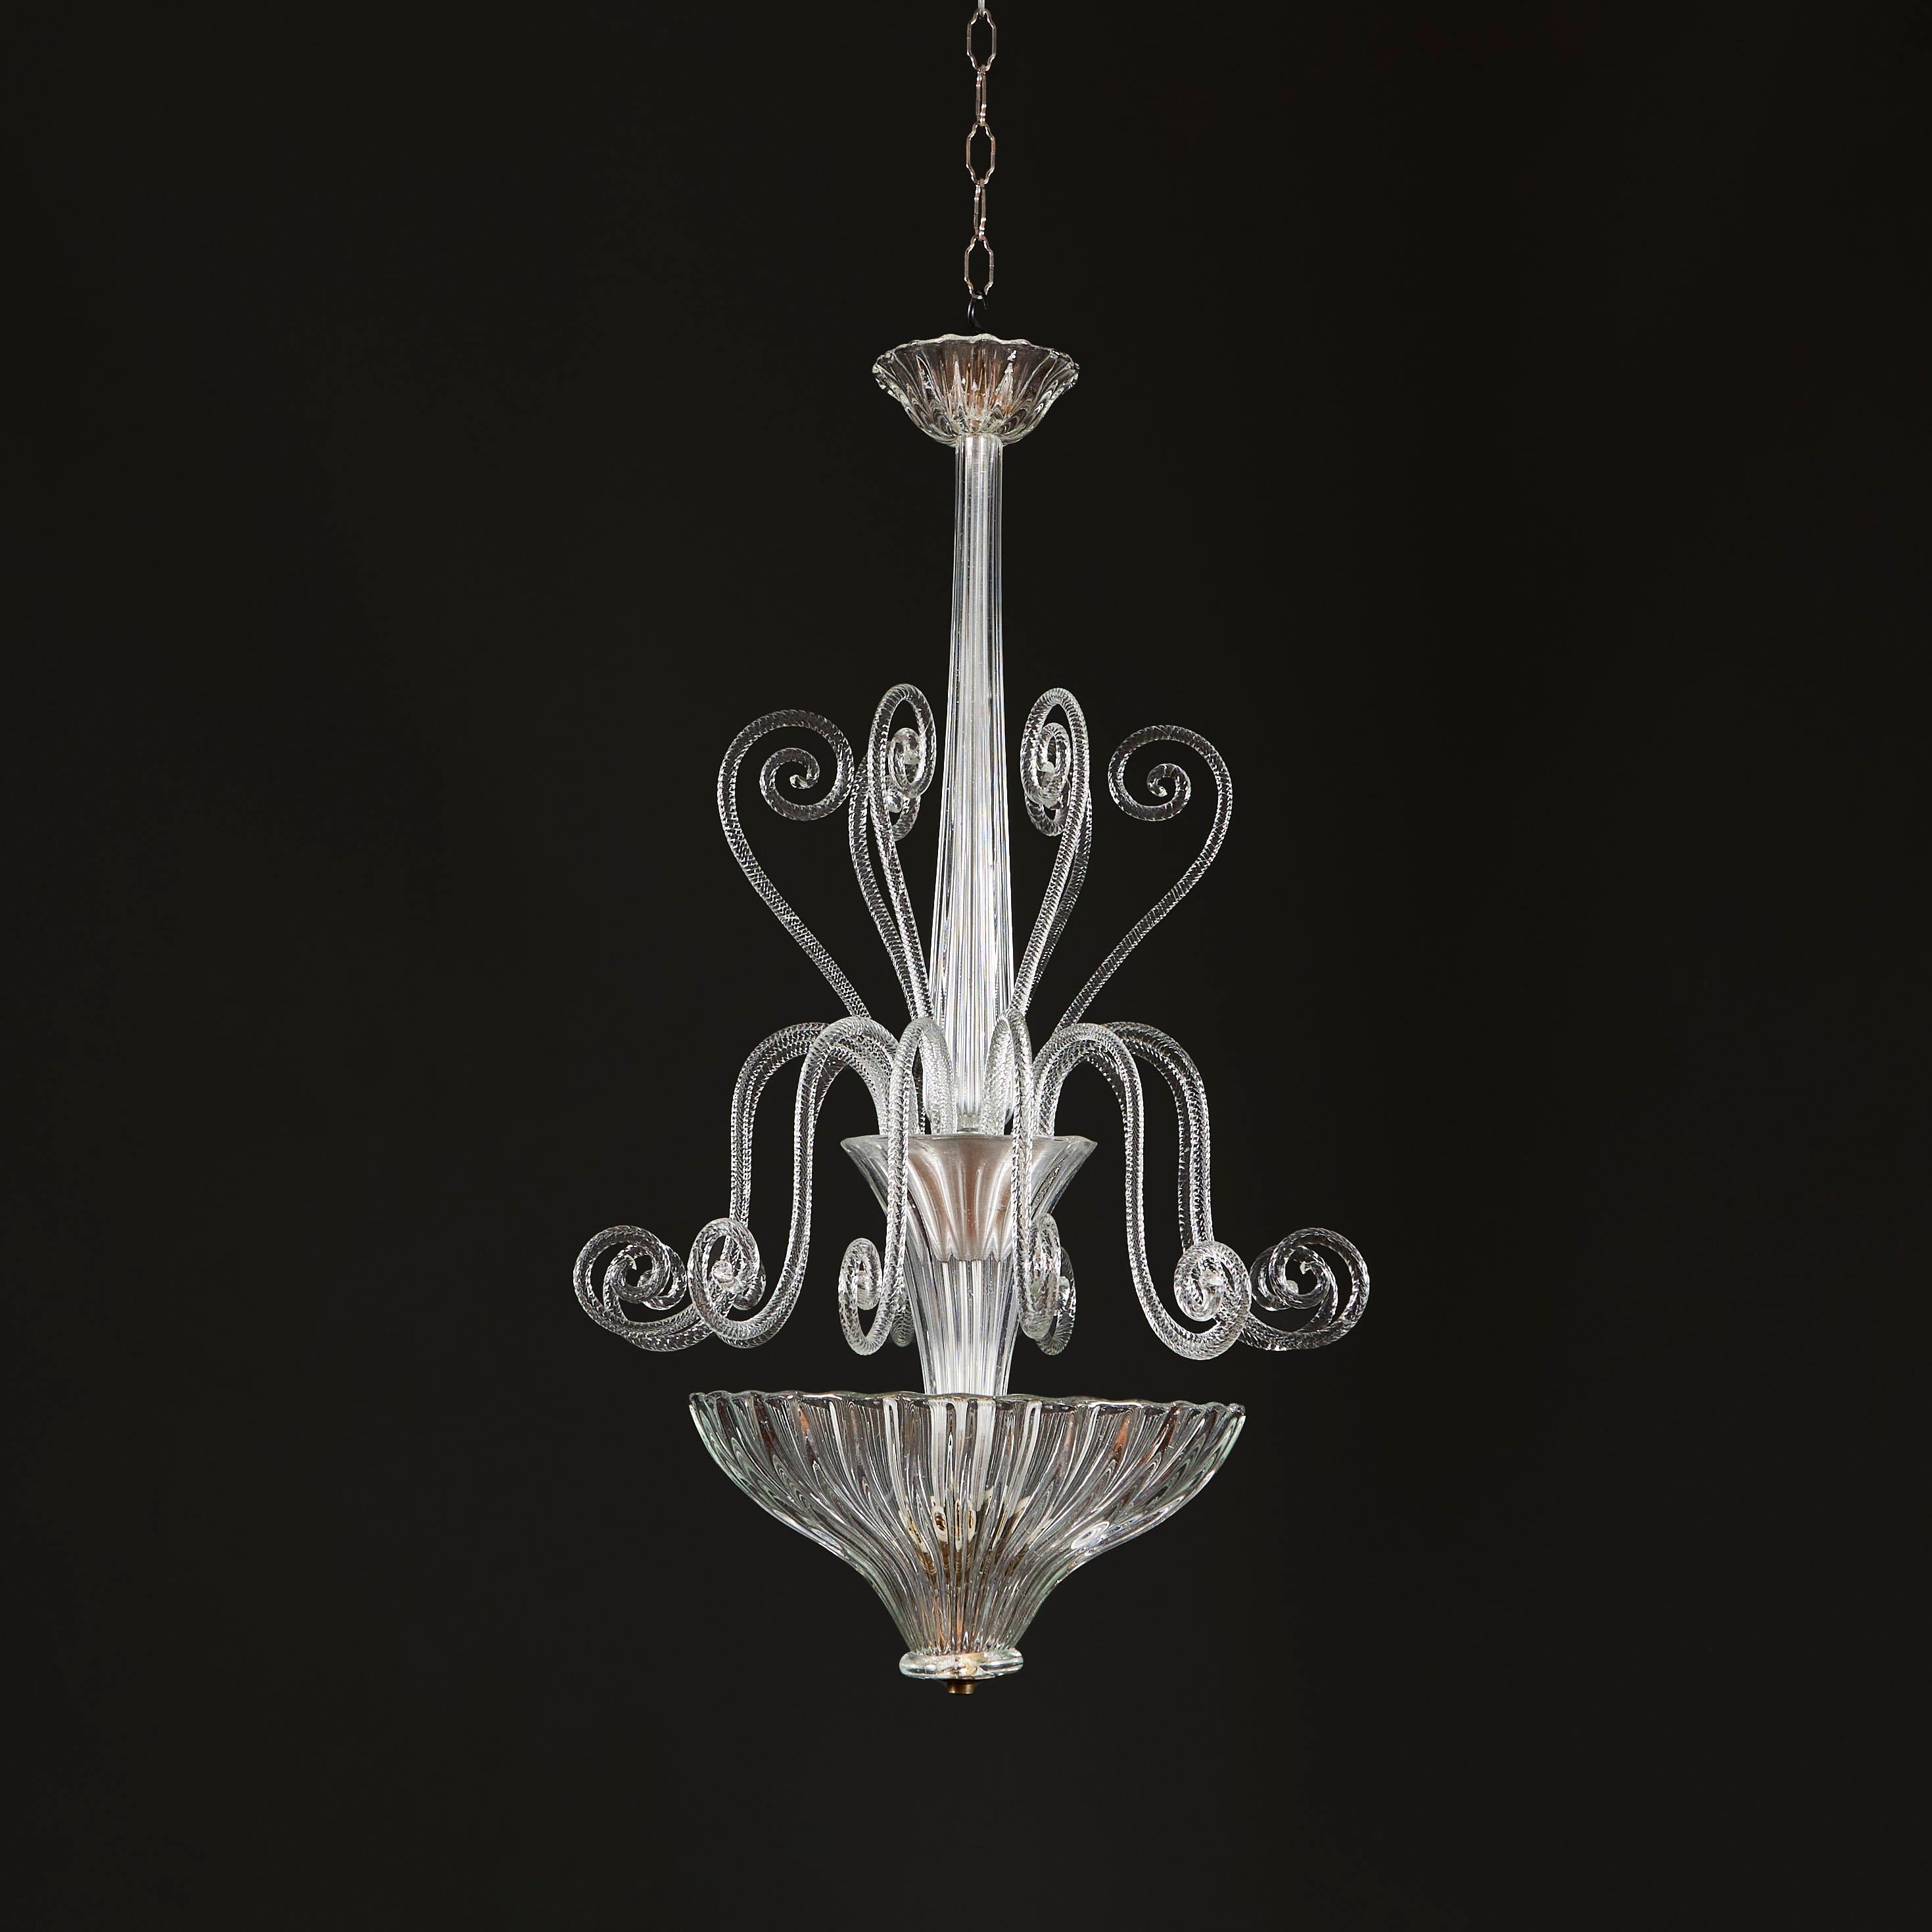 Italy, circa 1940

An unusual early twentieth century hanging light with glass fluted stem and unfurling tendrils of foliate form, all issuing from a vase raised above a gadrooned glass dish light. Attributed to Ercole Barovier. 

Height